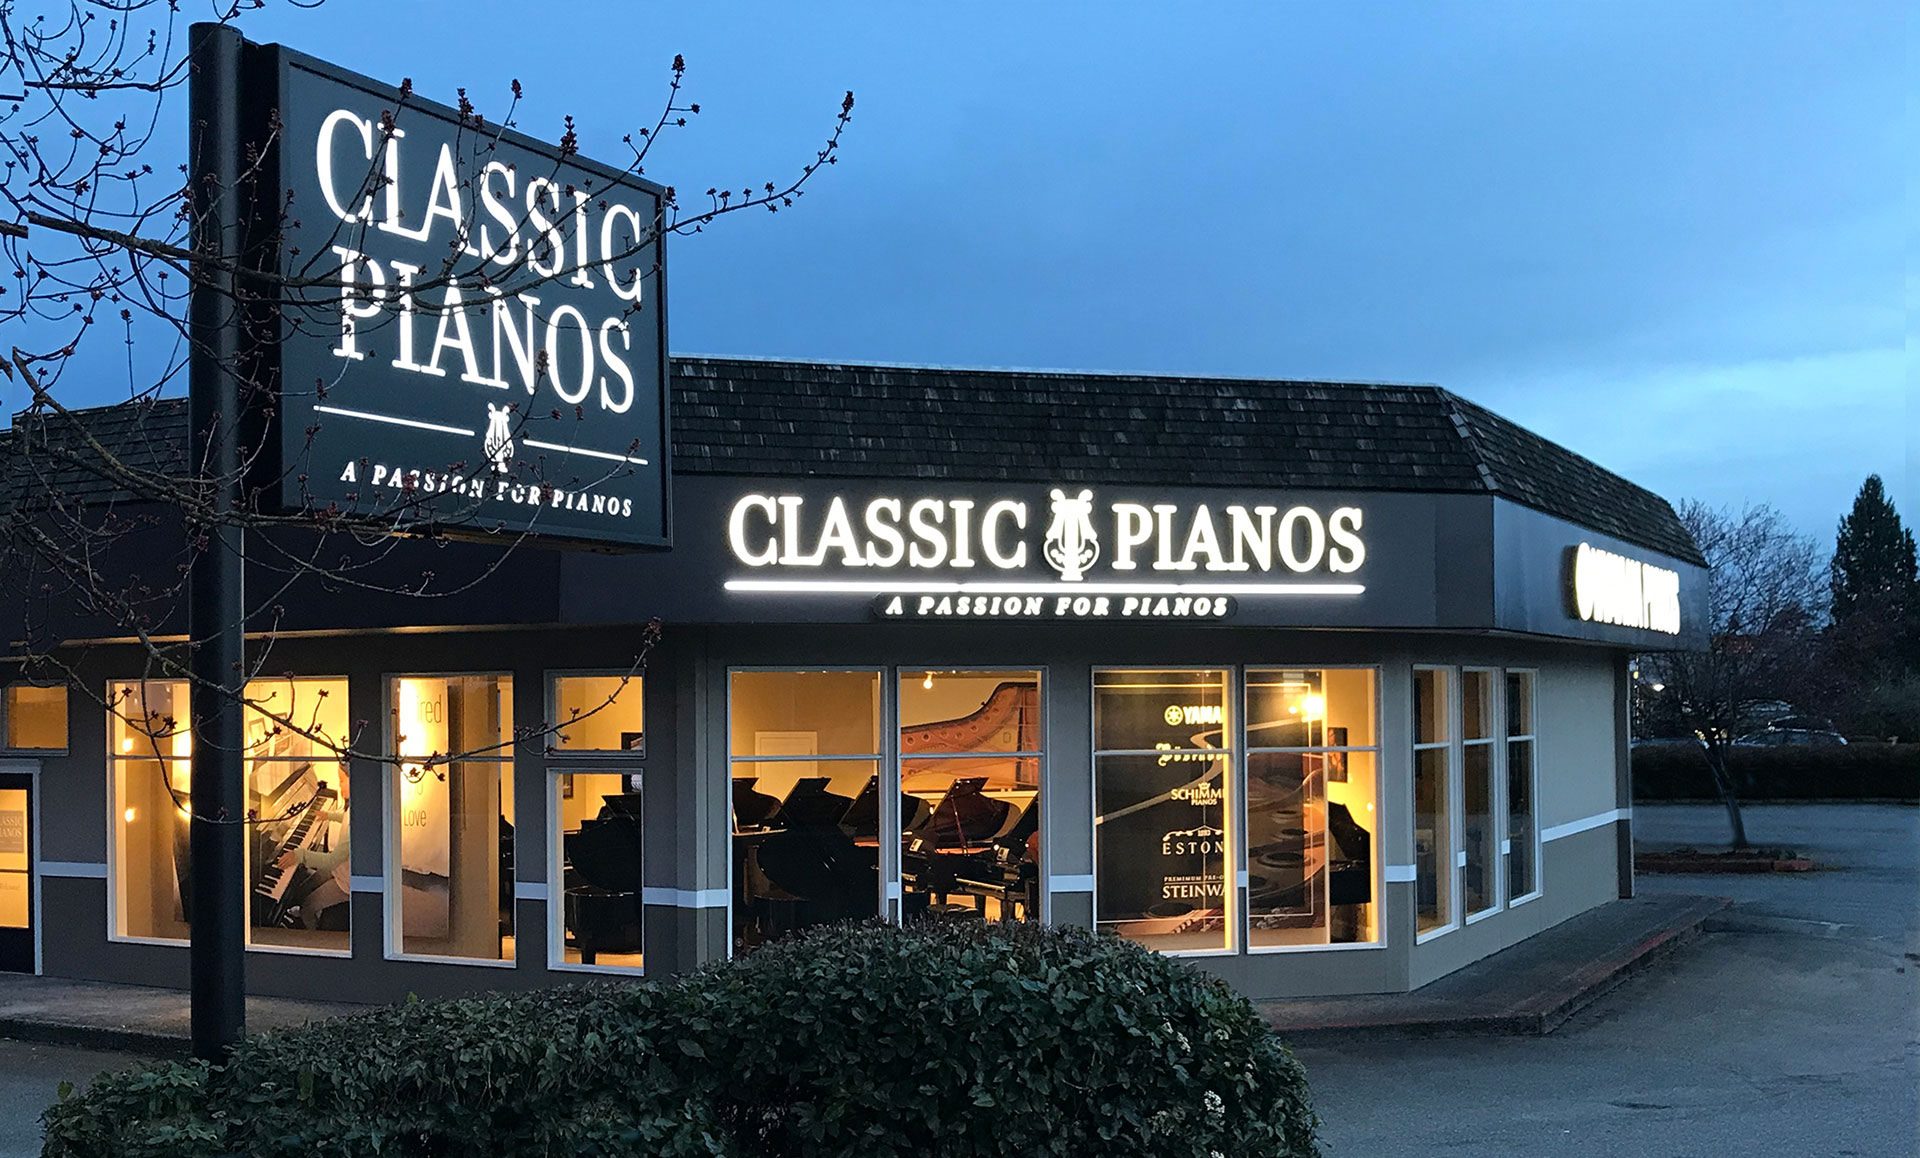 The Classic Pianos Difference